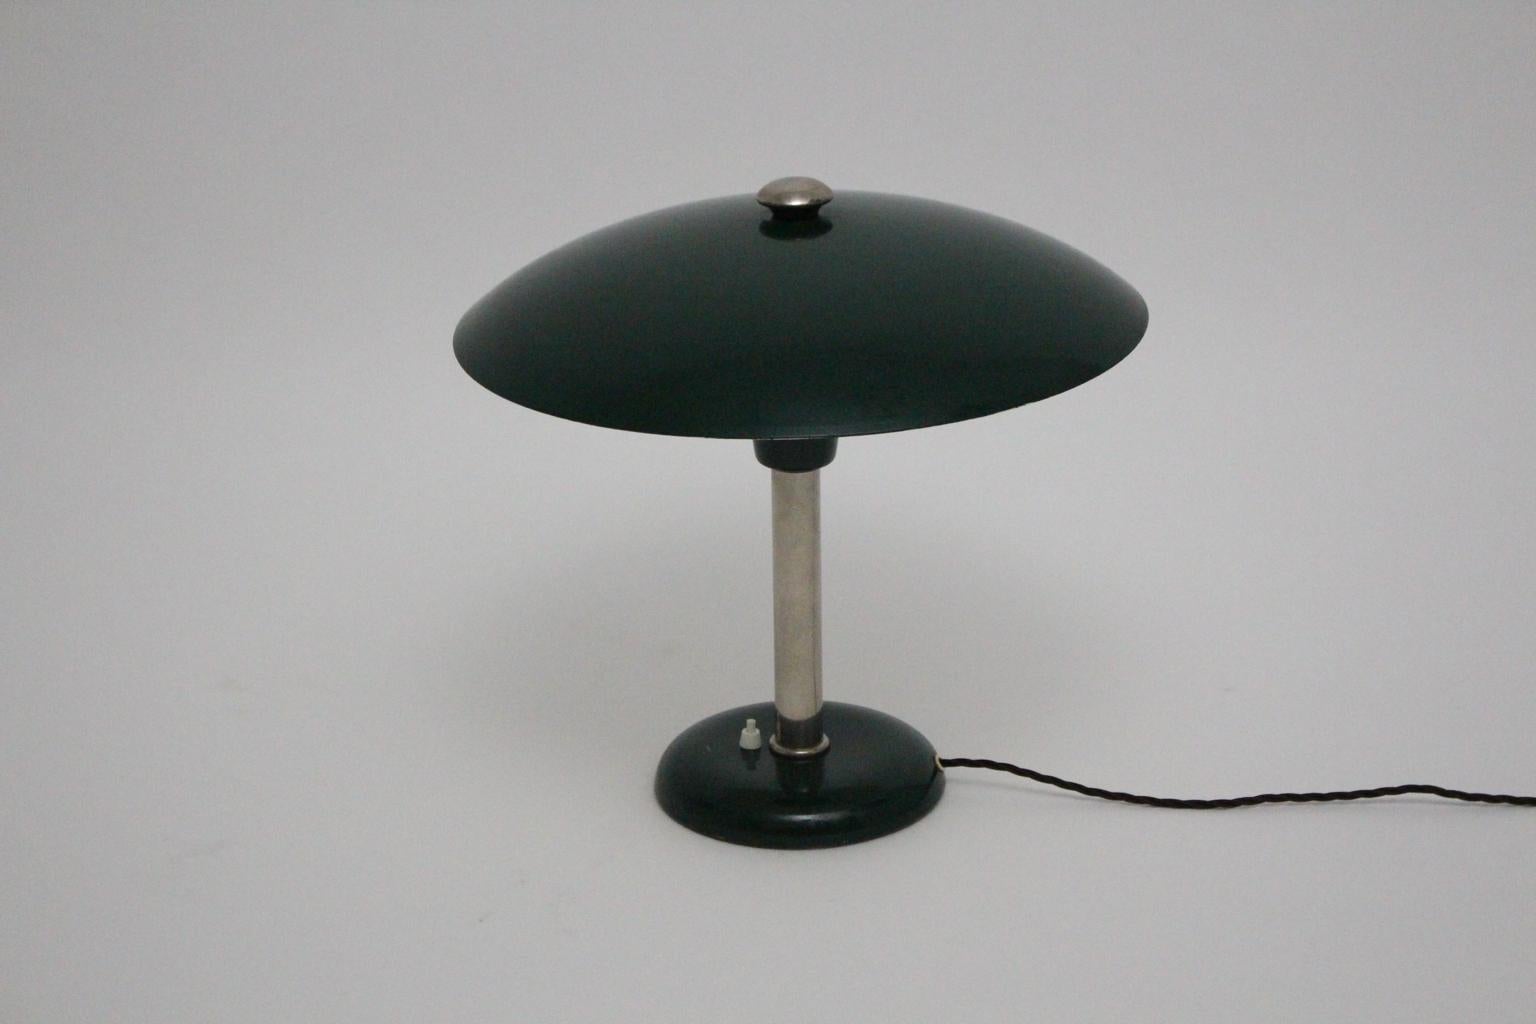 Green Bauhaus Art Deco Vintage Table Lamp Metal by Max Schumacher, 1934, Germany In Good Condition For Sale In Vienna, AT